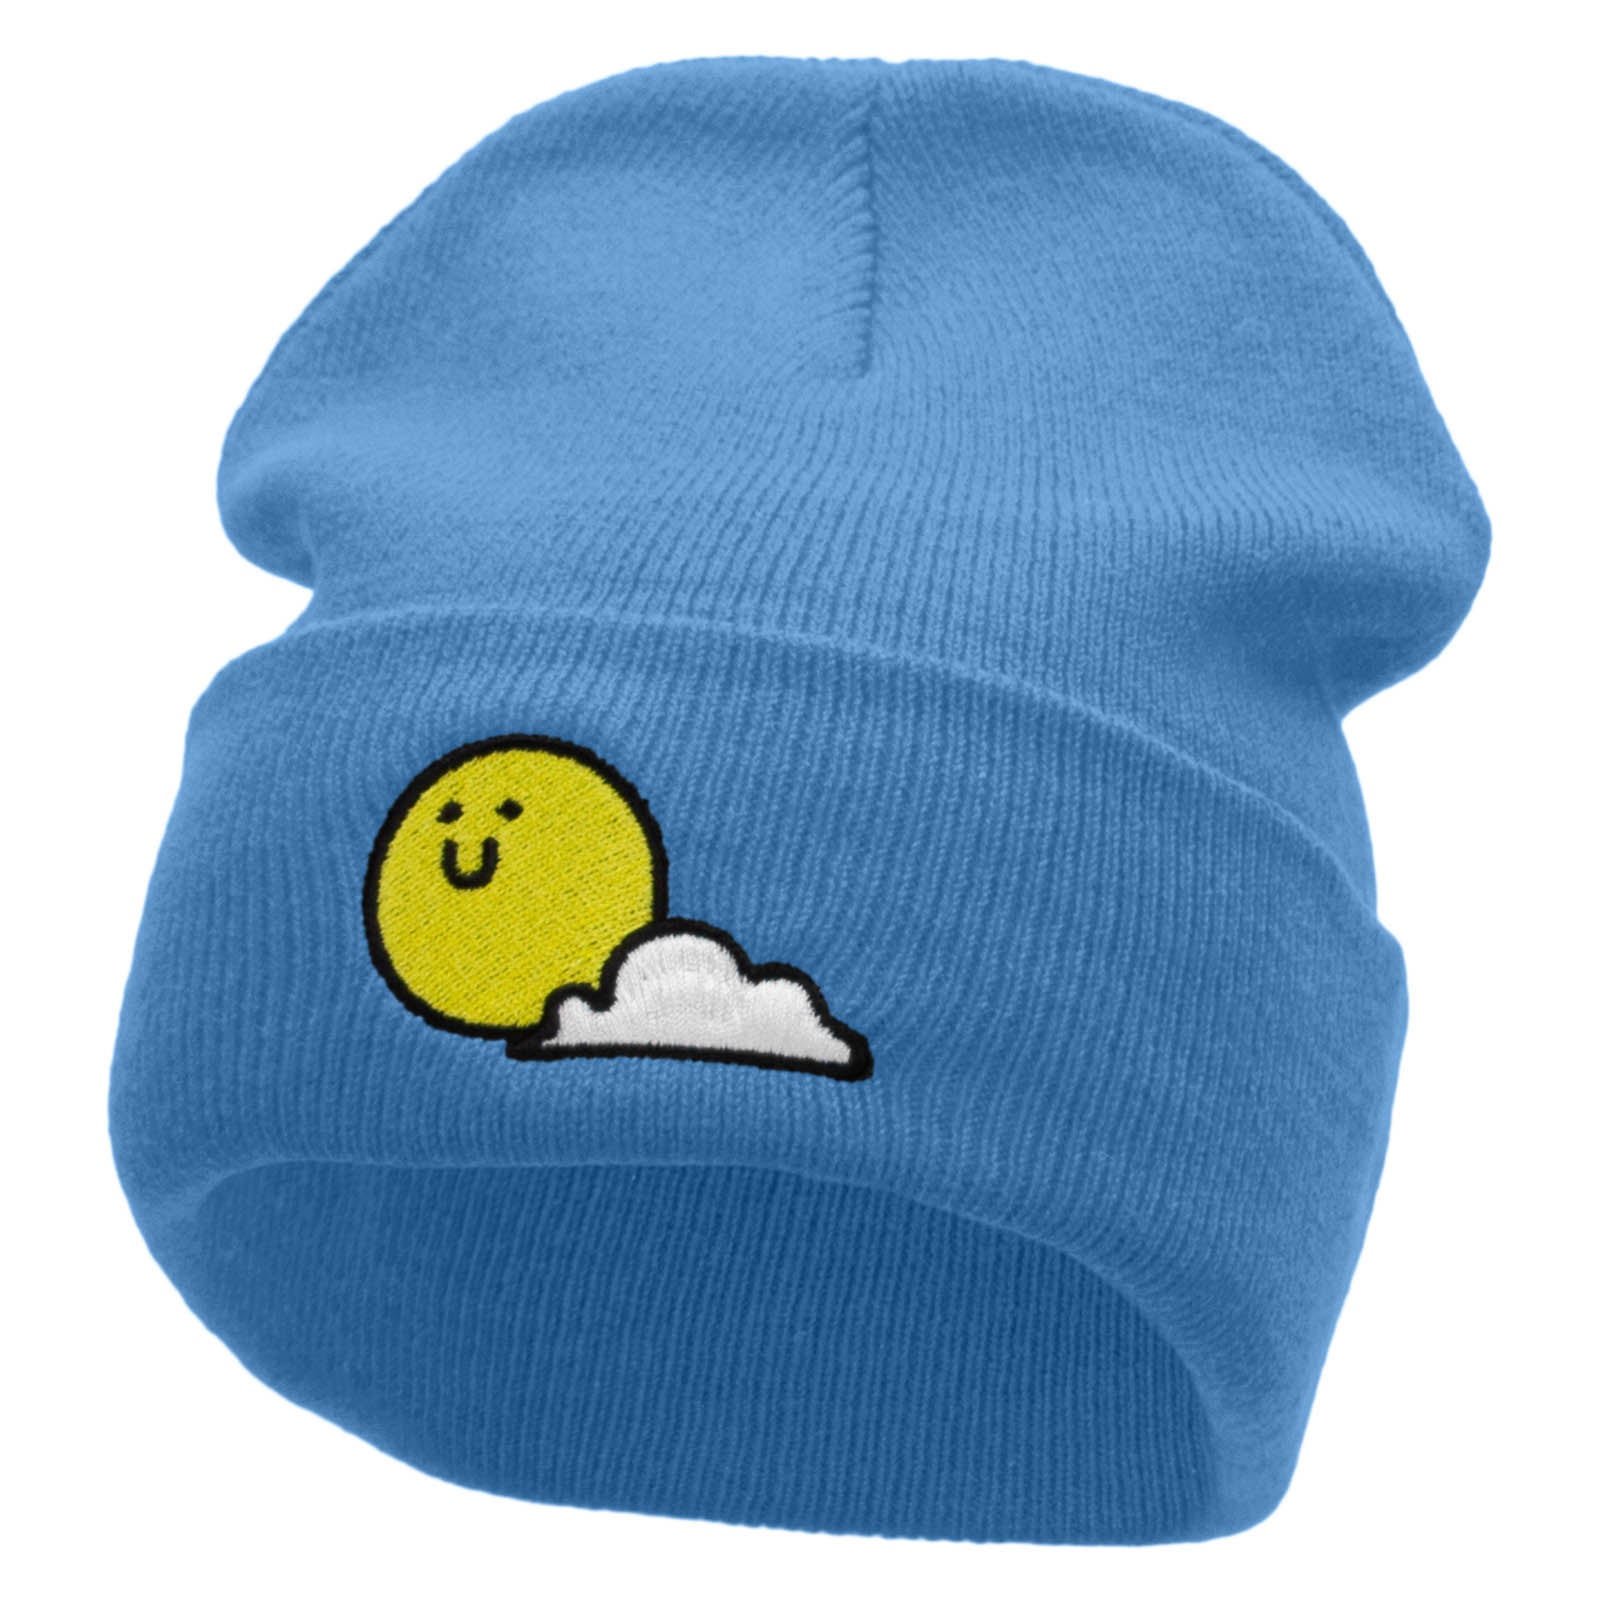 Sunny Smile Embroidered 12 Inch Long Knitted Beanie - Sky Blue OSFM